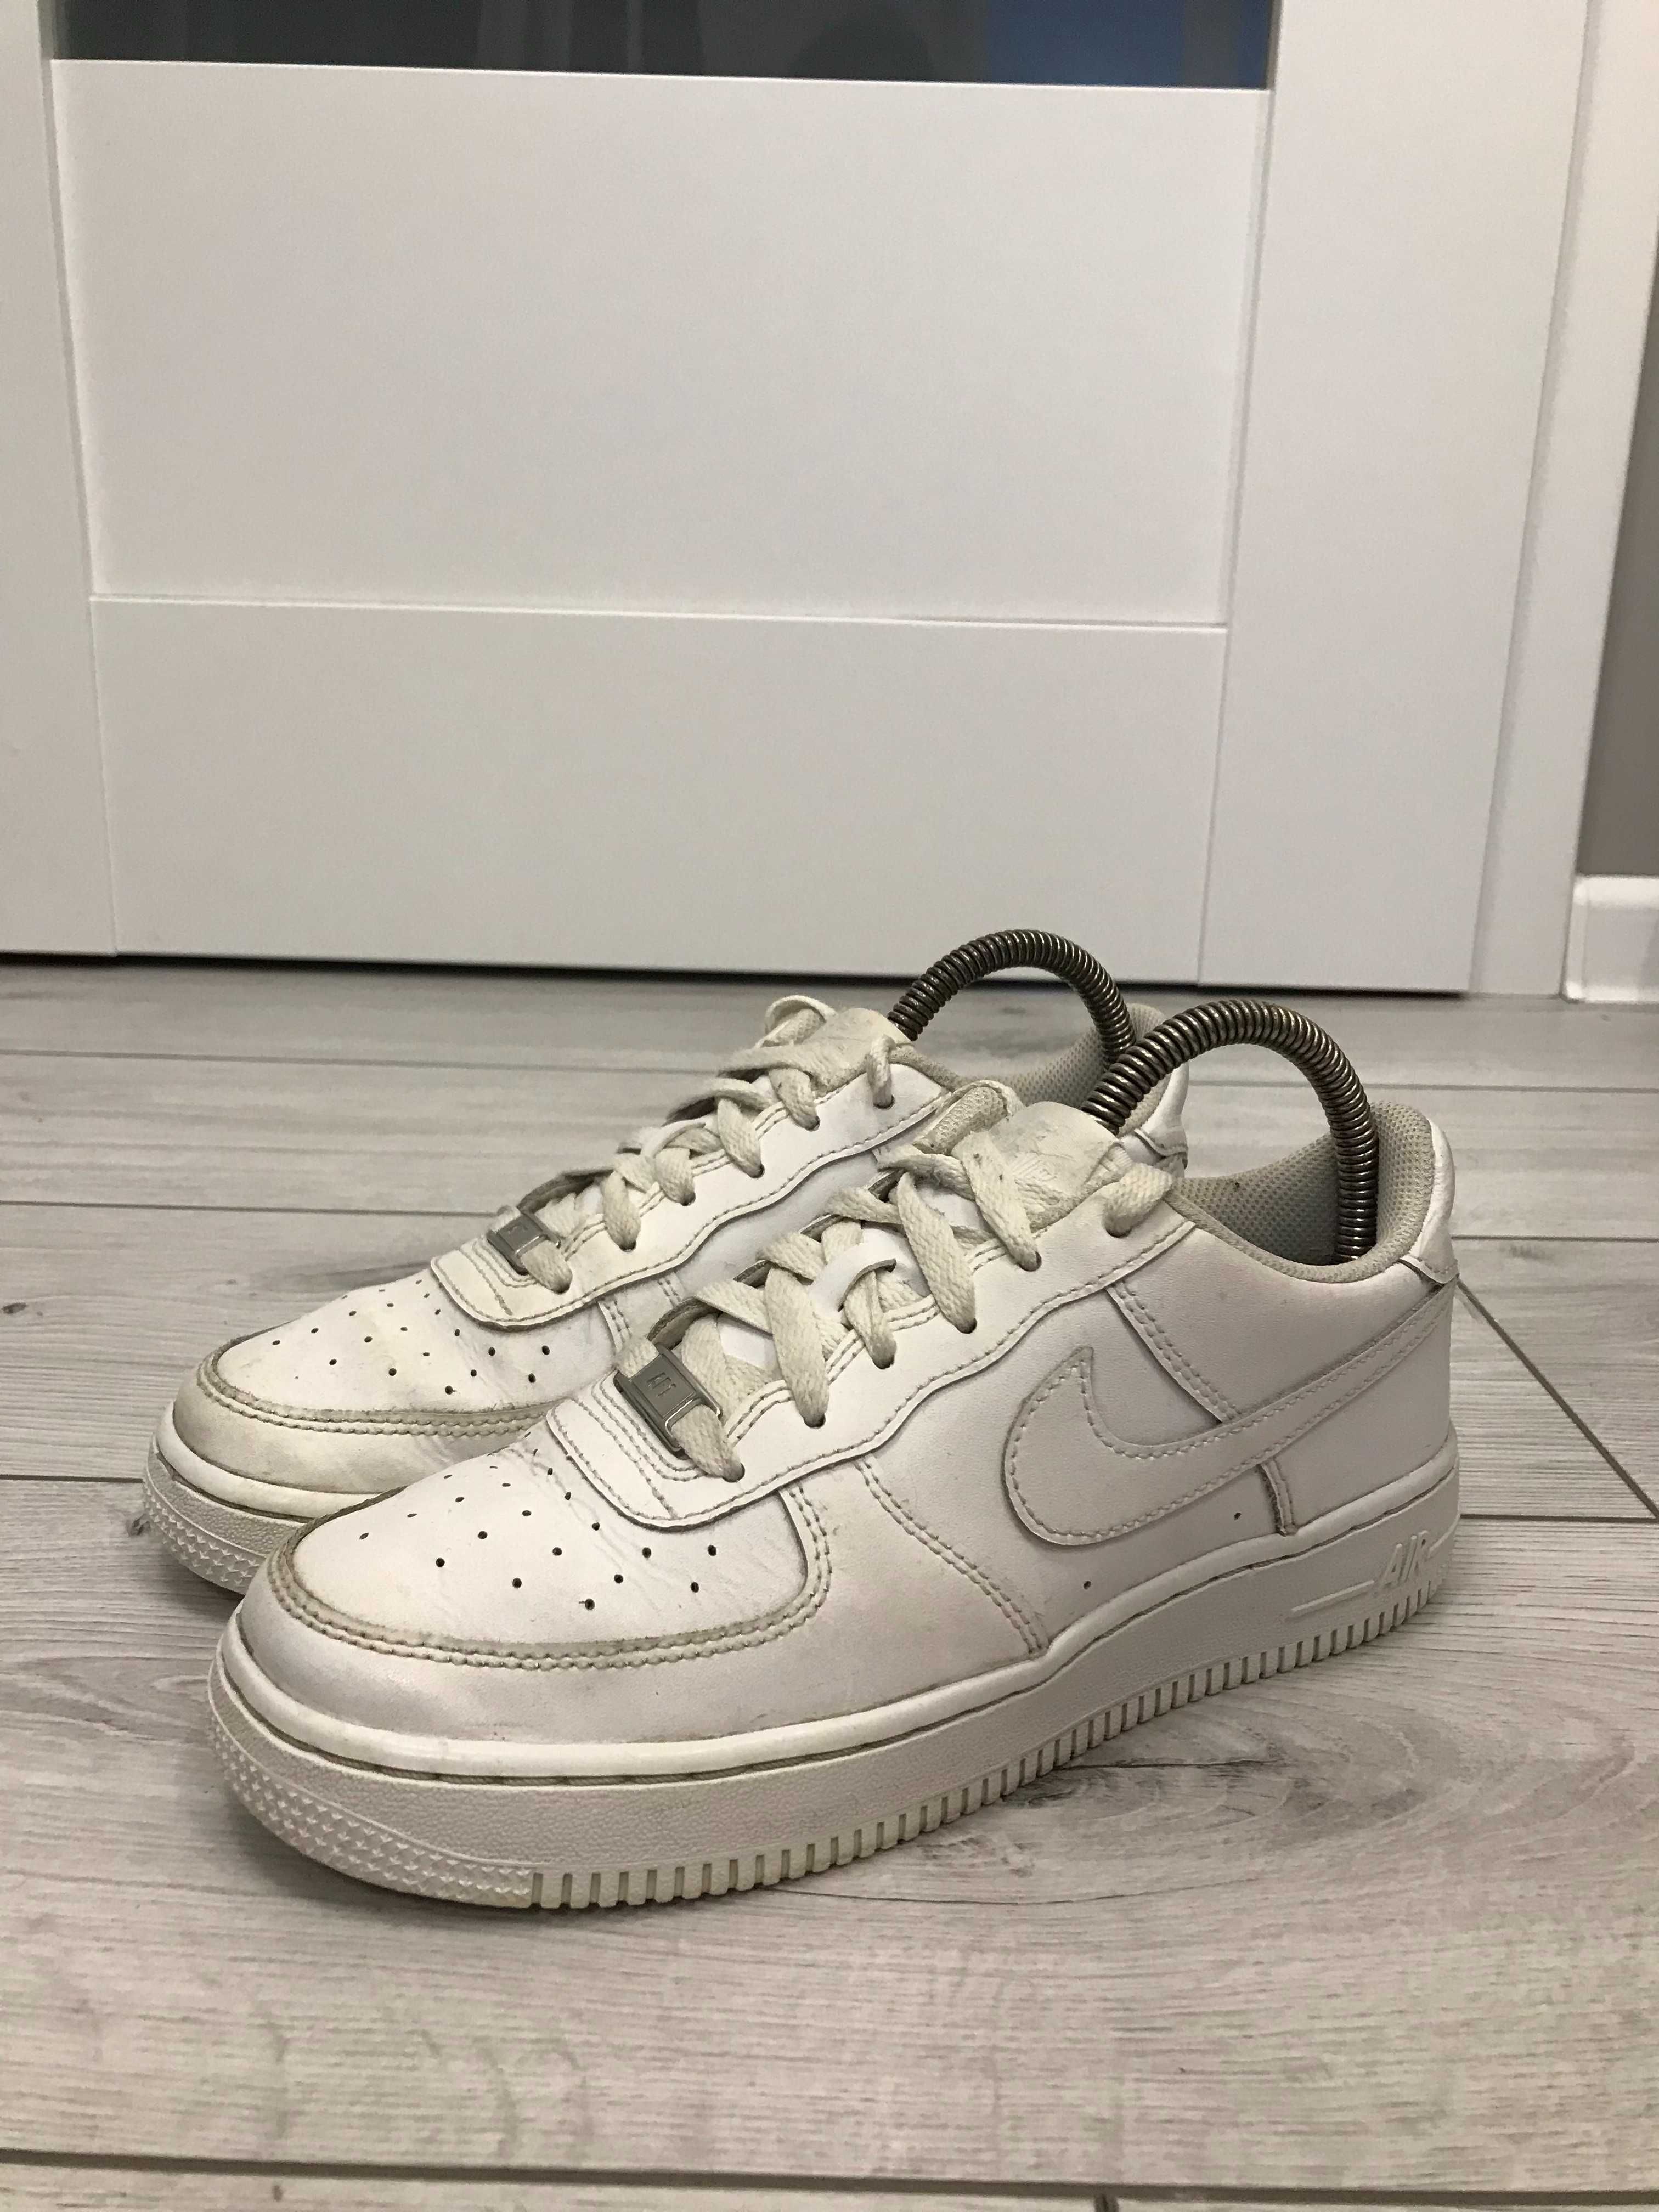 Buty Nike Air Force One Low rozm. 38